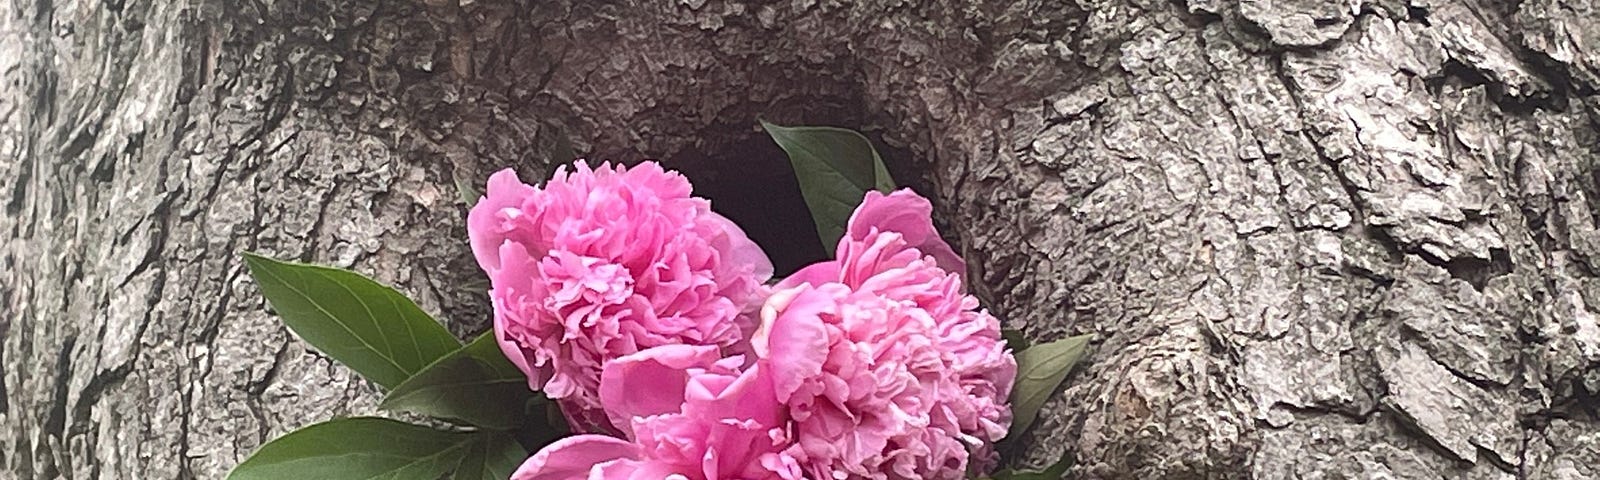 Three pink peony flowers are arranged in the hollow of a tree trunk.